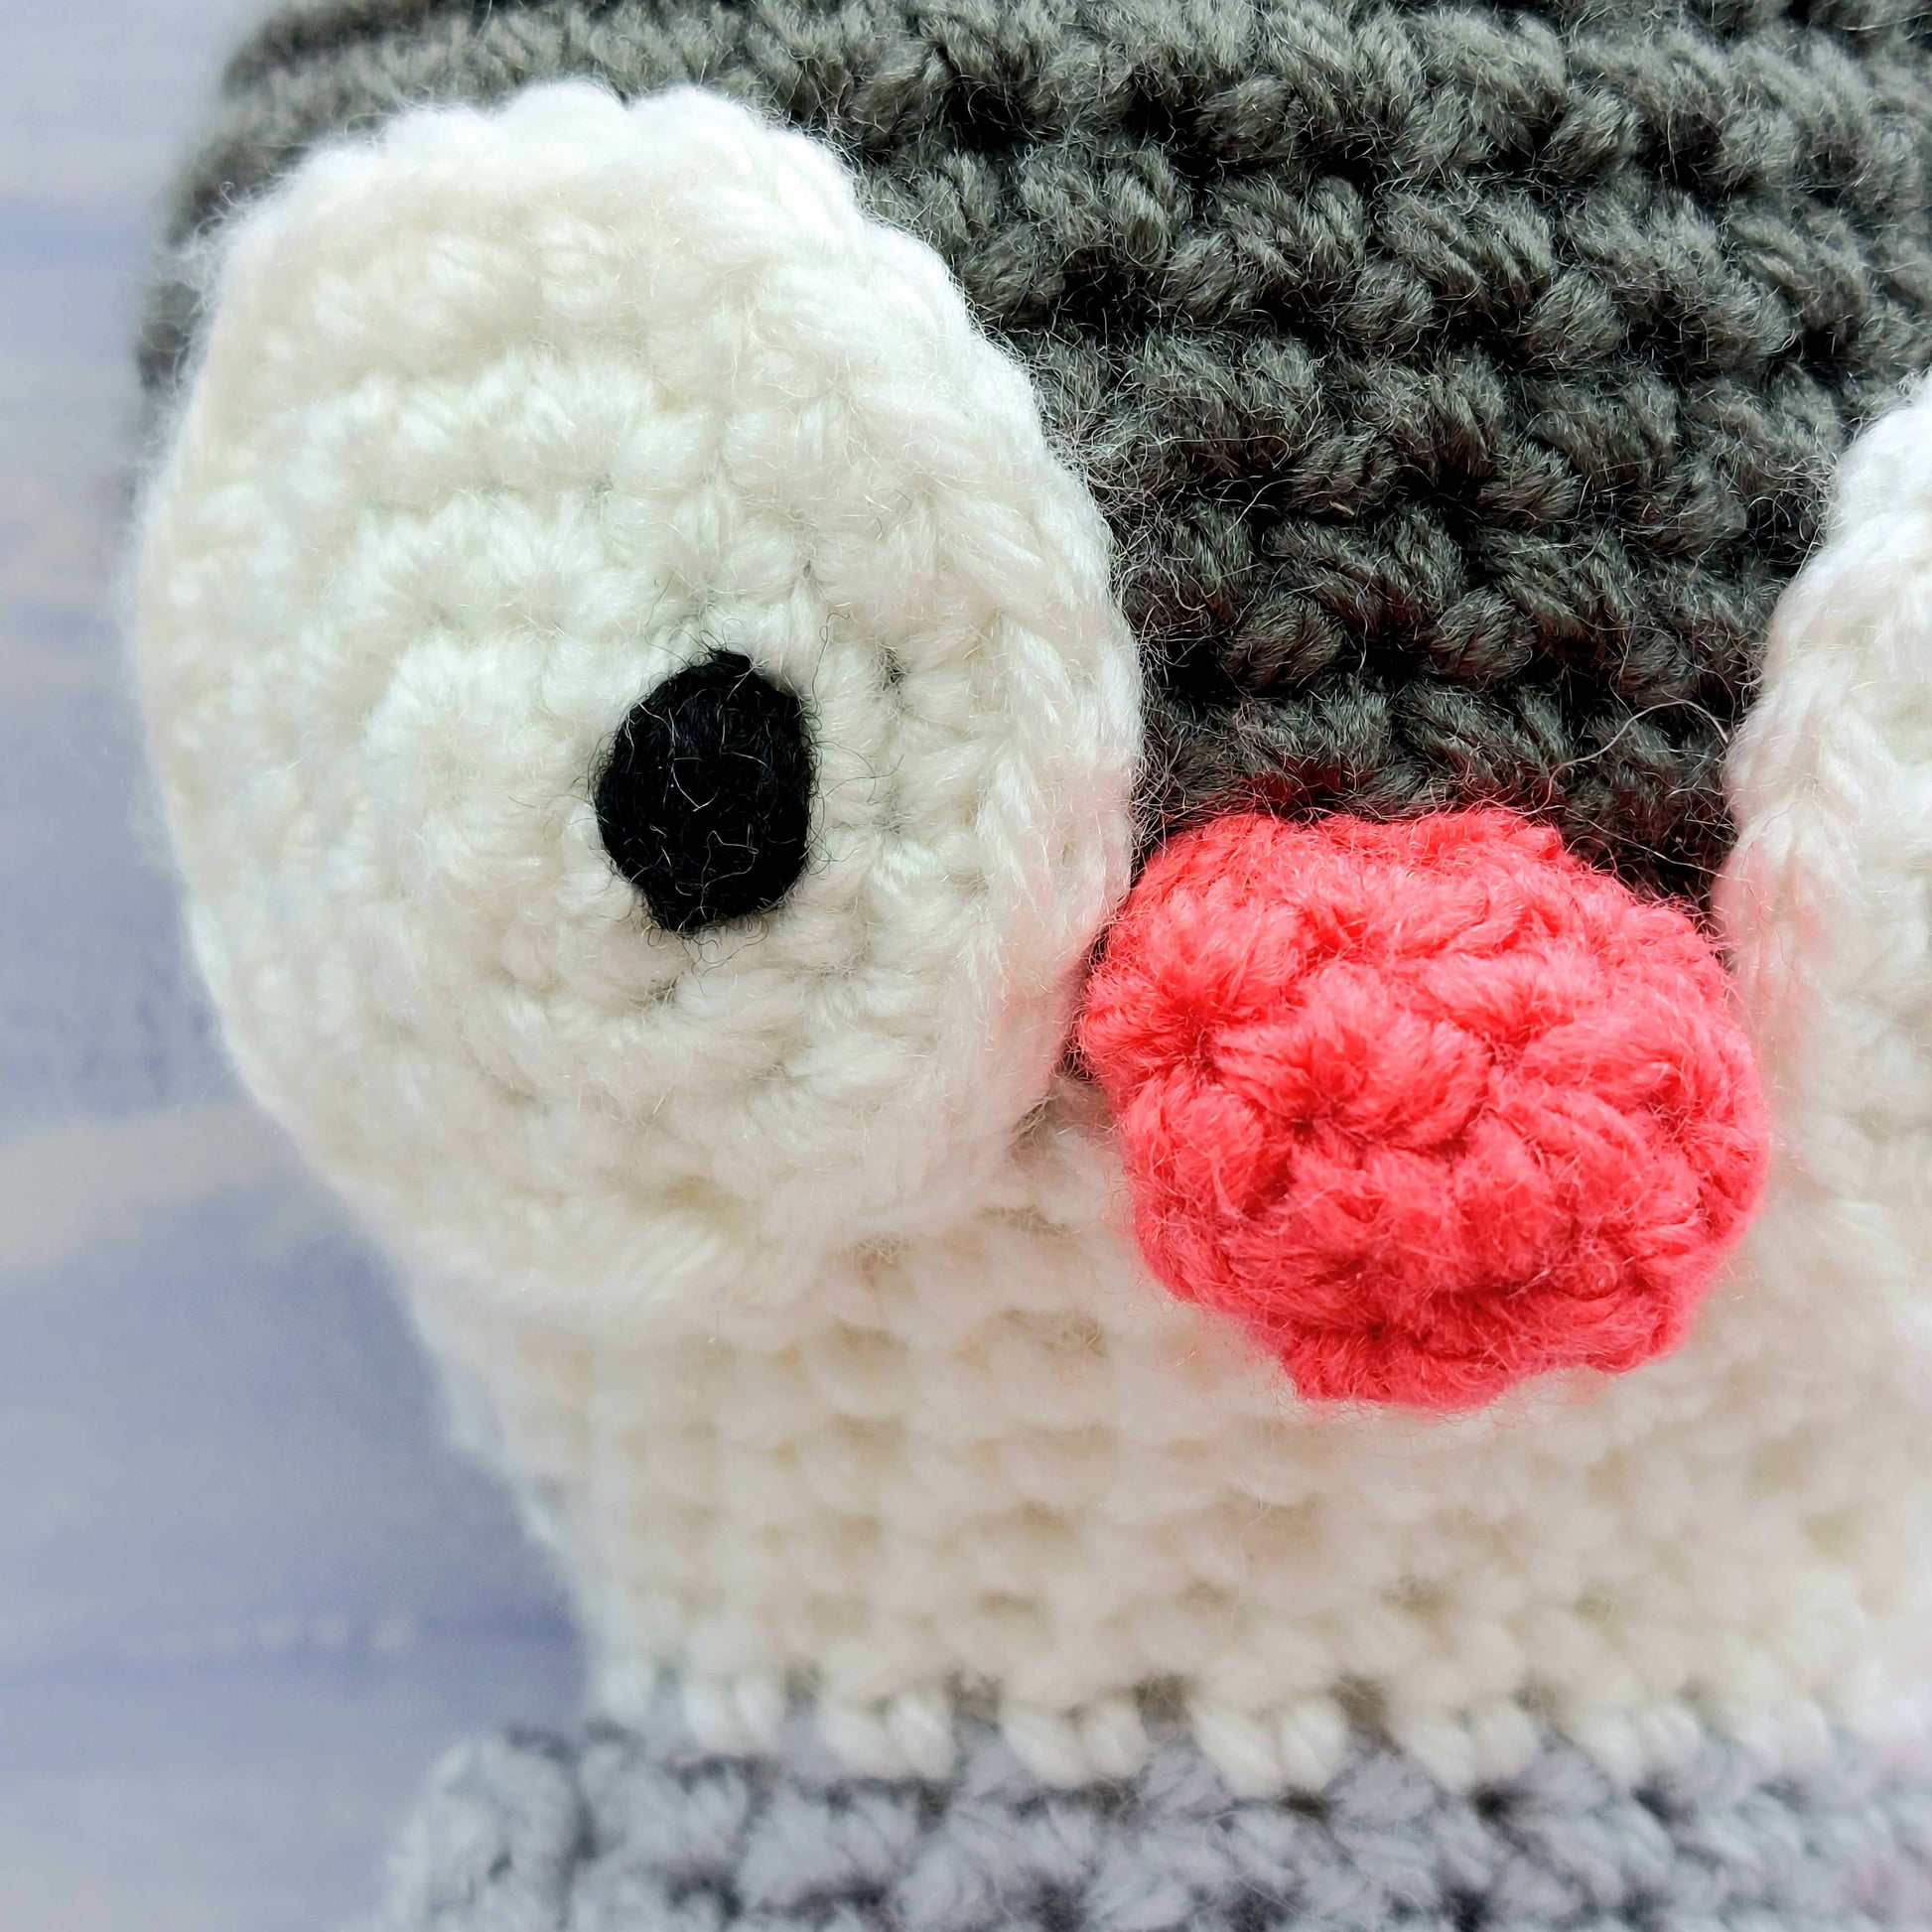 close up of crochet detail on Penguijns nose and eyes